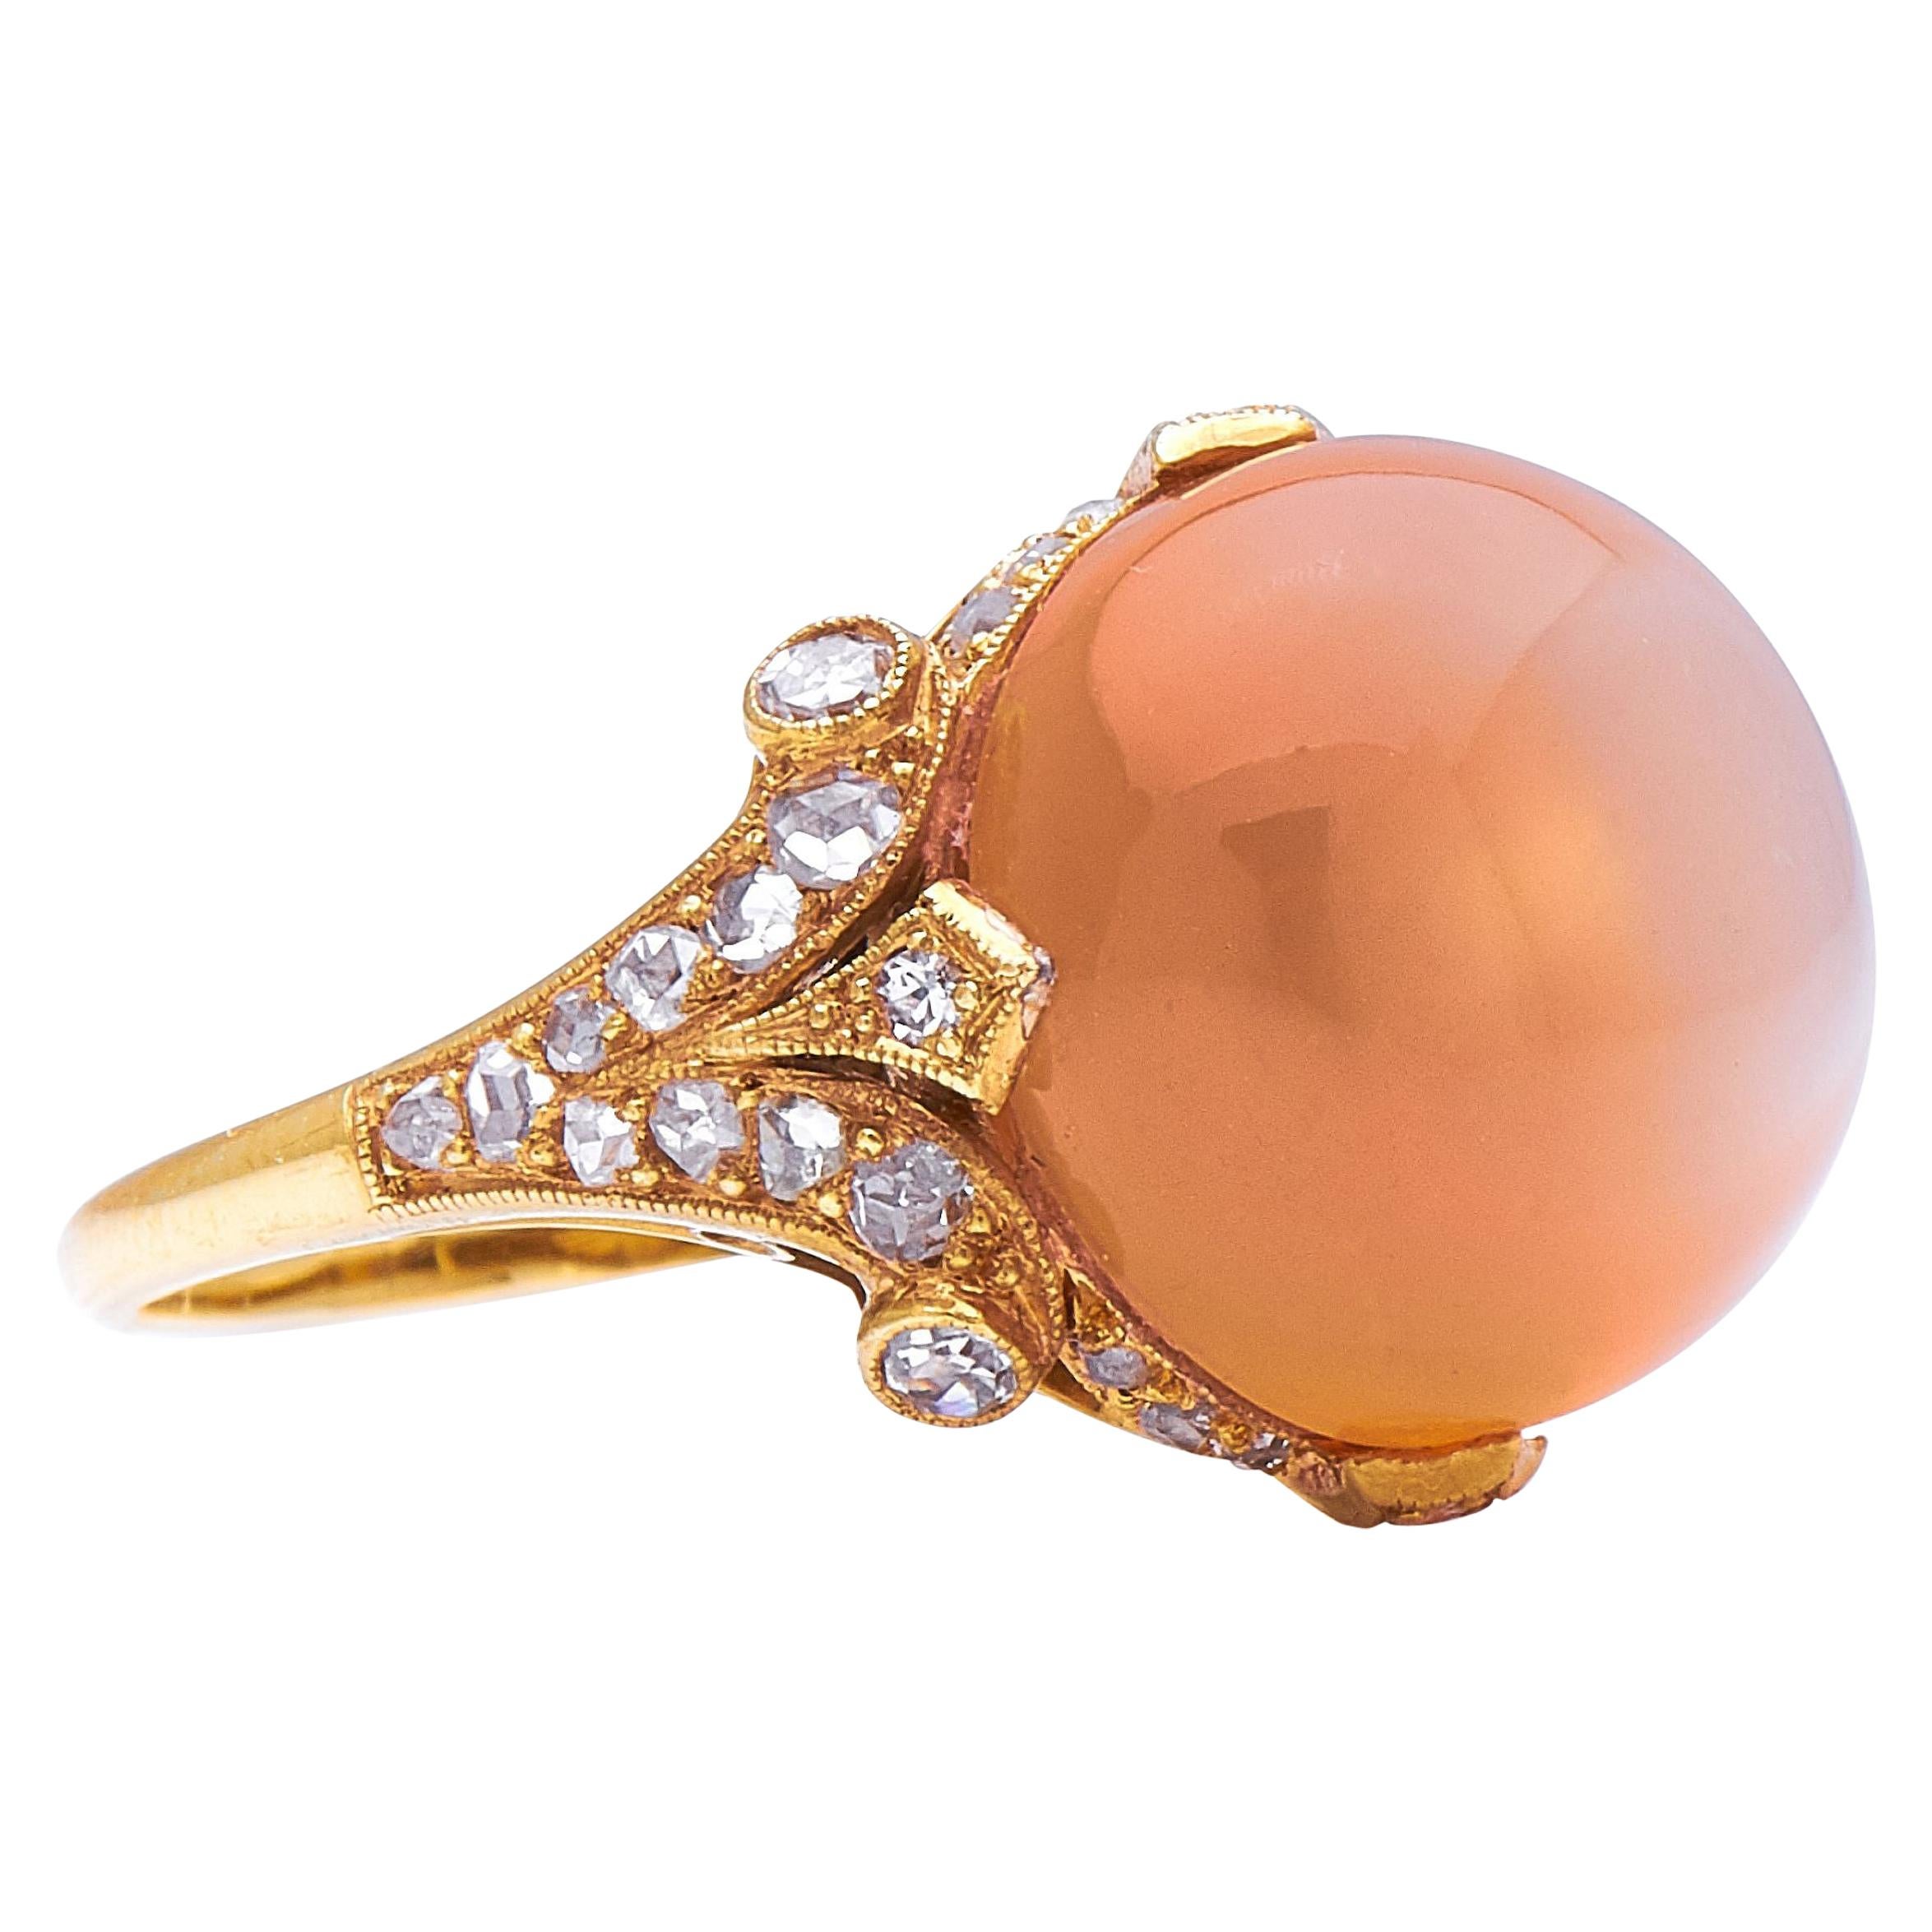 Incredible Antique, Belle Époque, 18 Carat Gold Peach Moonstone and Diamond Ring For Sale